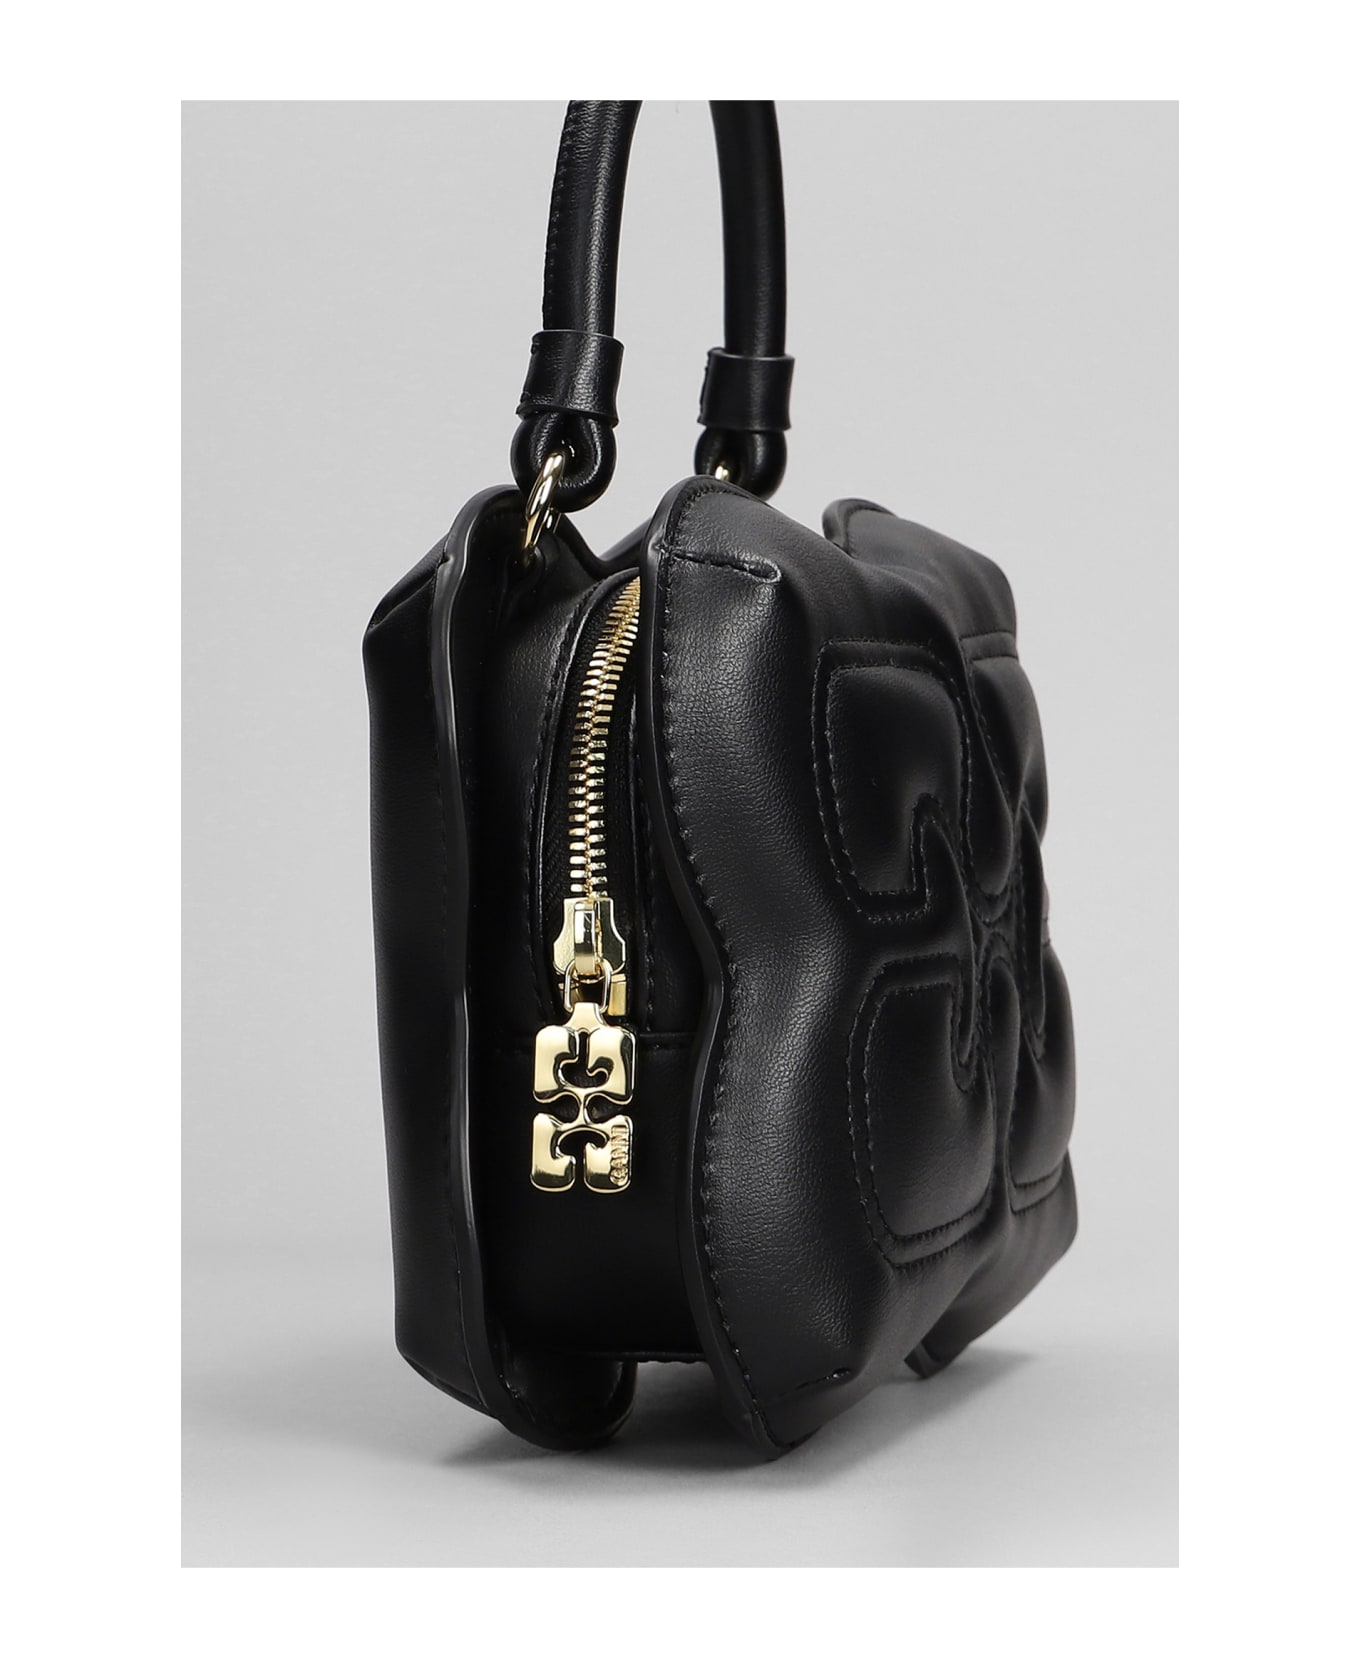 Ganni Butterfly Hand Bag In Black Leather - black